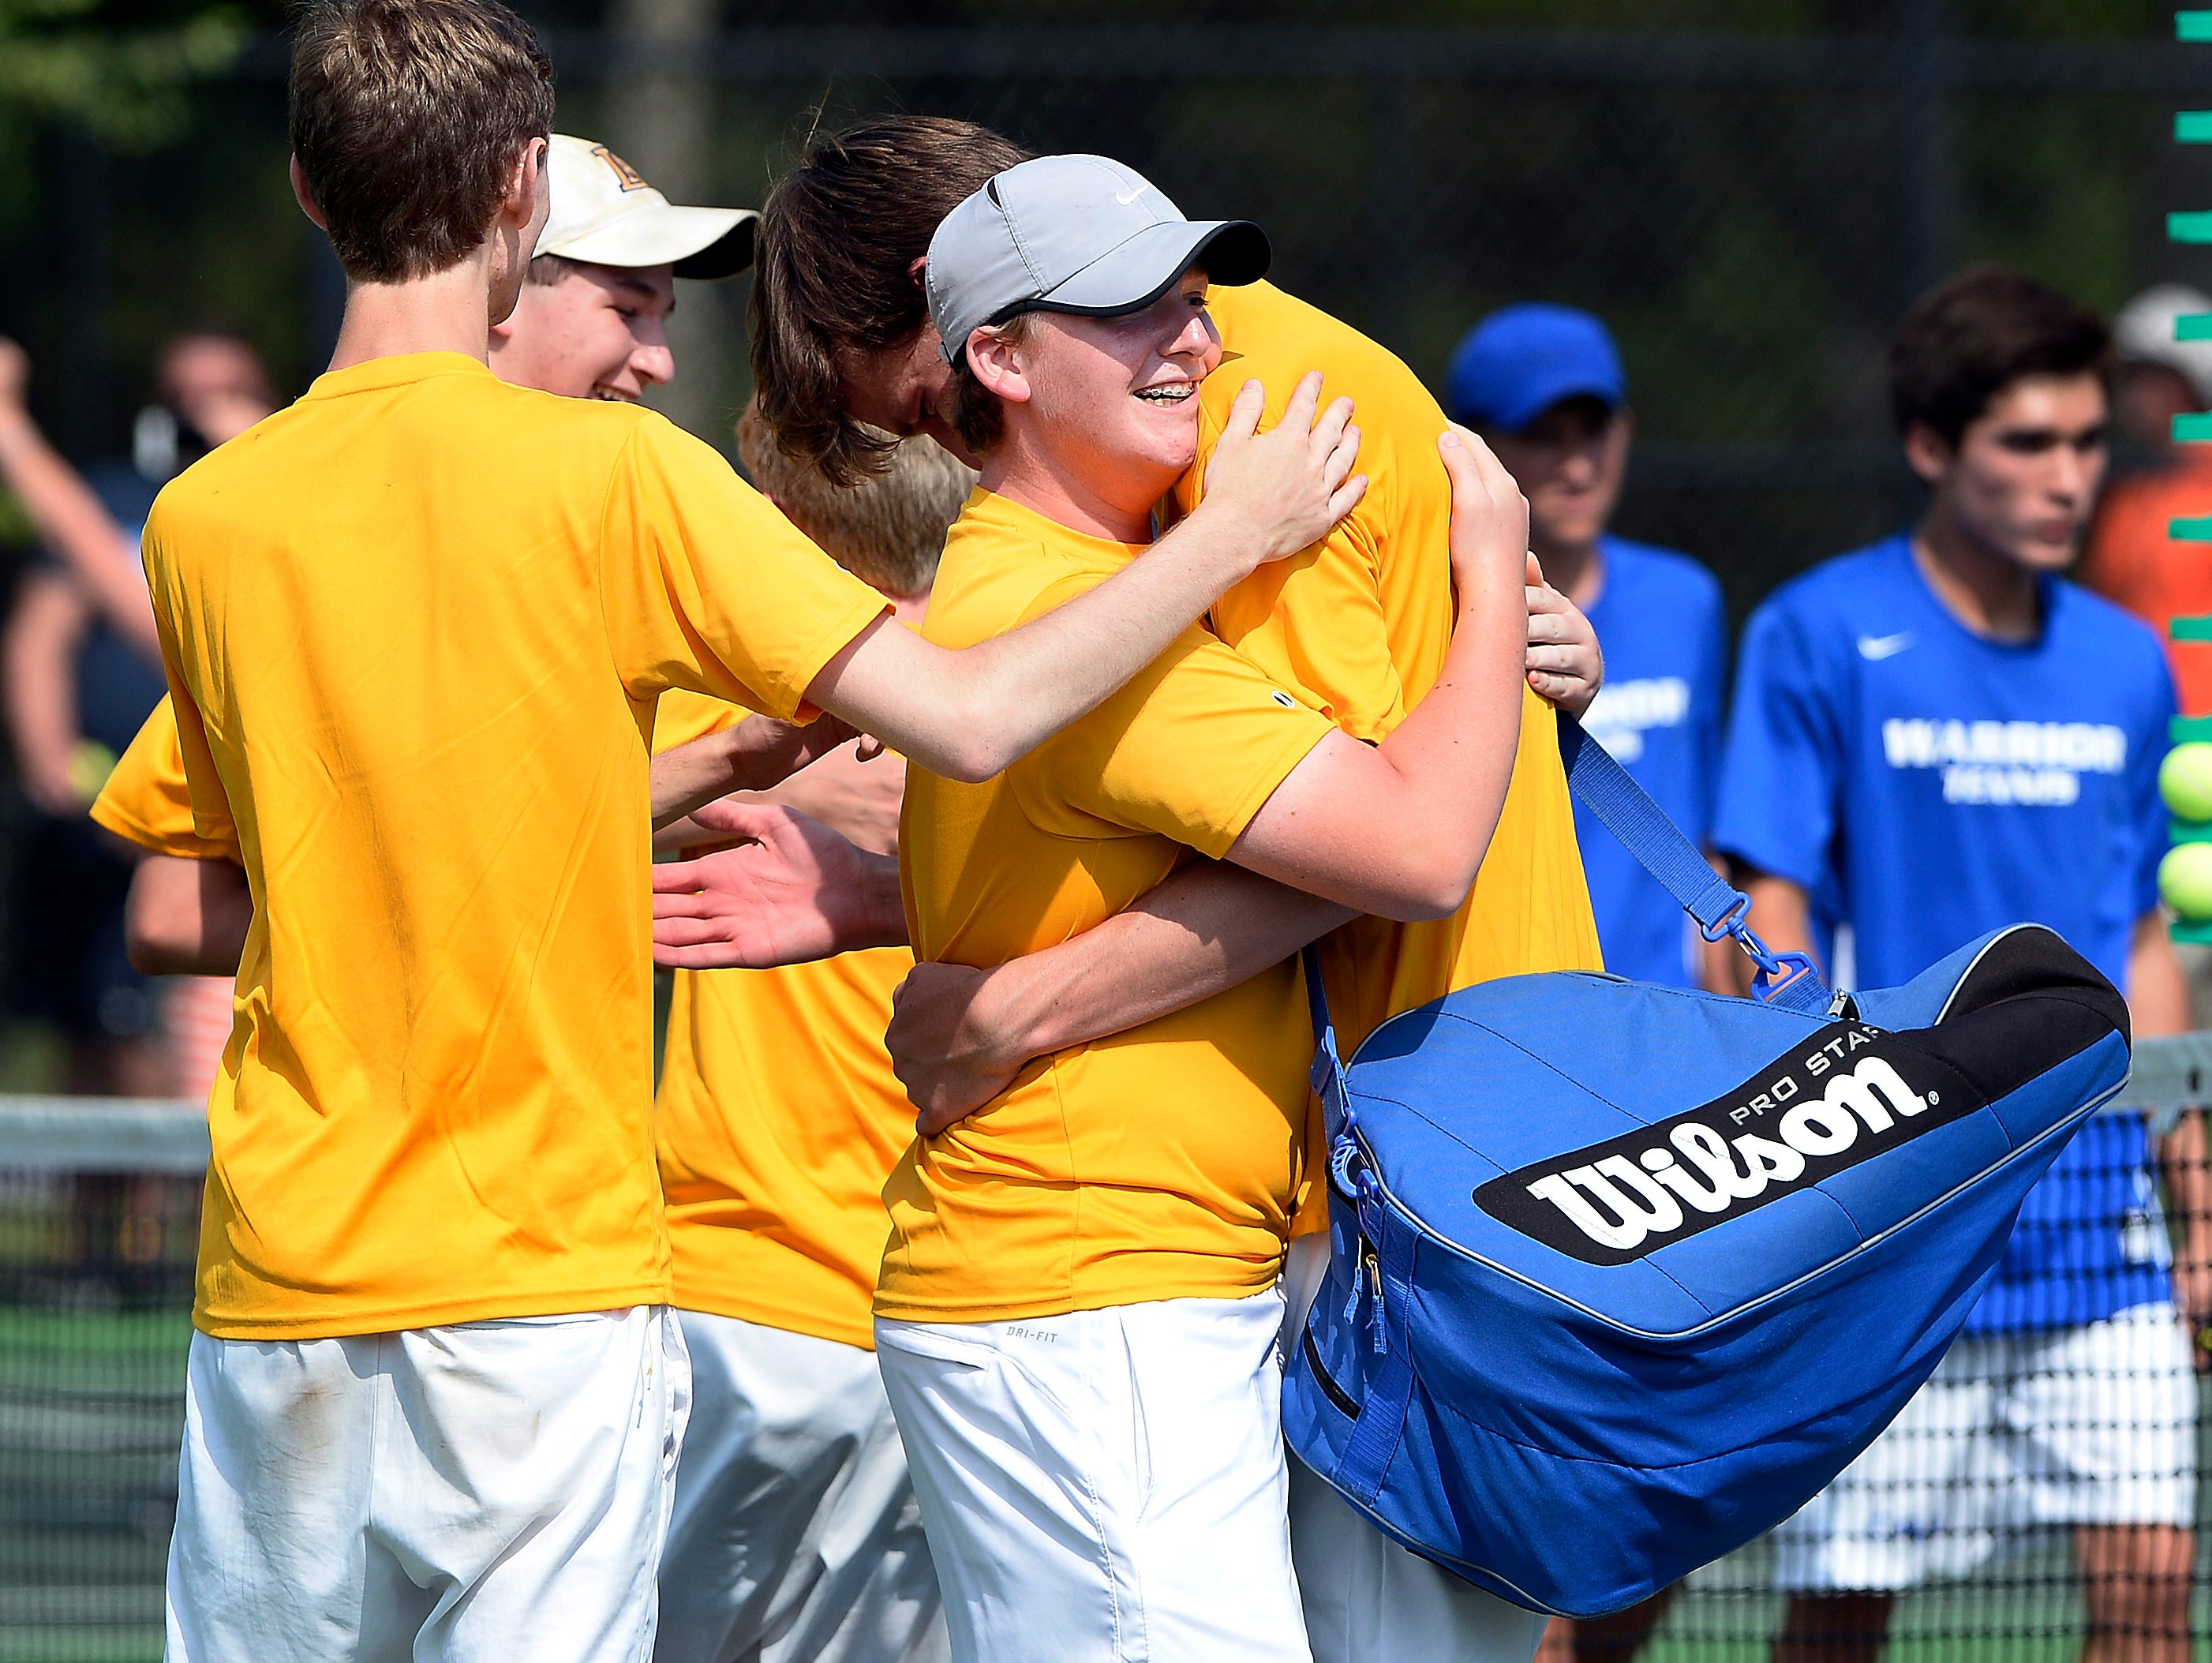 Lipscomb High School players celebrate after defeating Christian Academy of Knoxville 4-2 during the Tennessee Class A-AA boys team tennis championship final Wednesday, May 25, 2016, in Murfreesboro, Tenn.